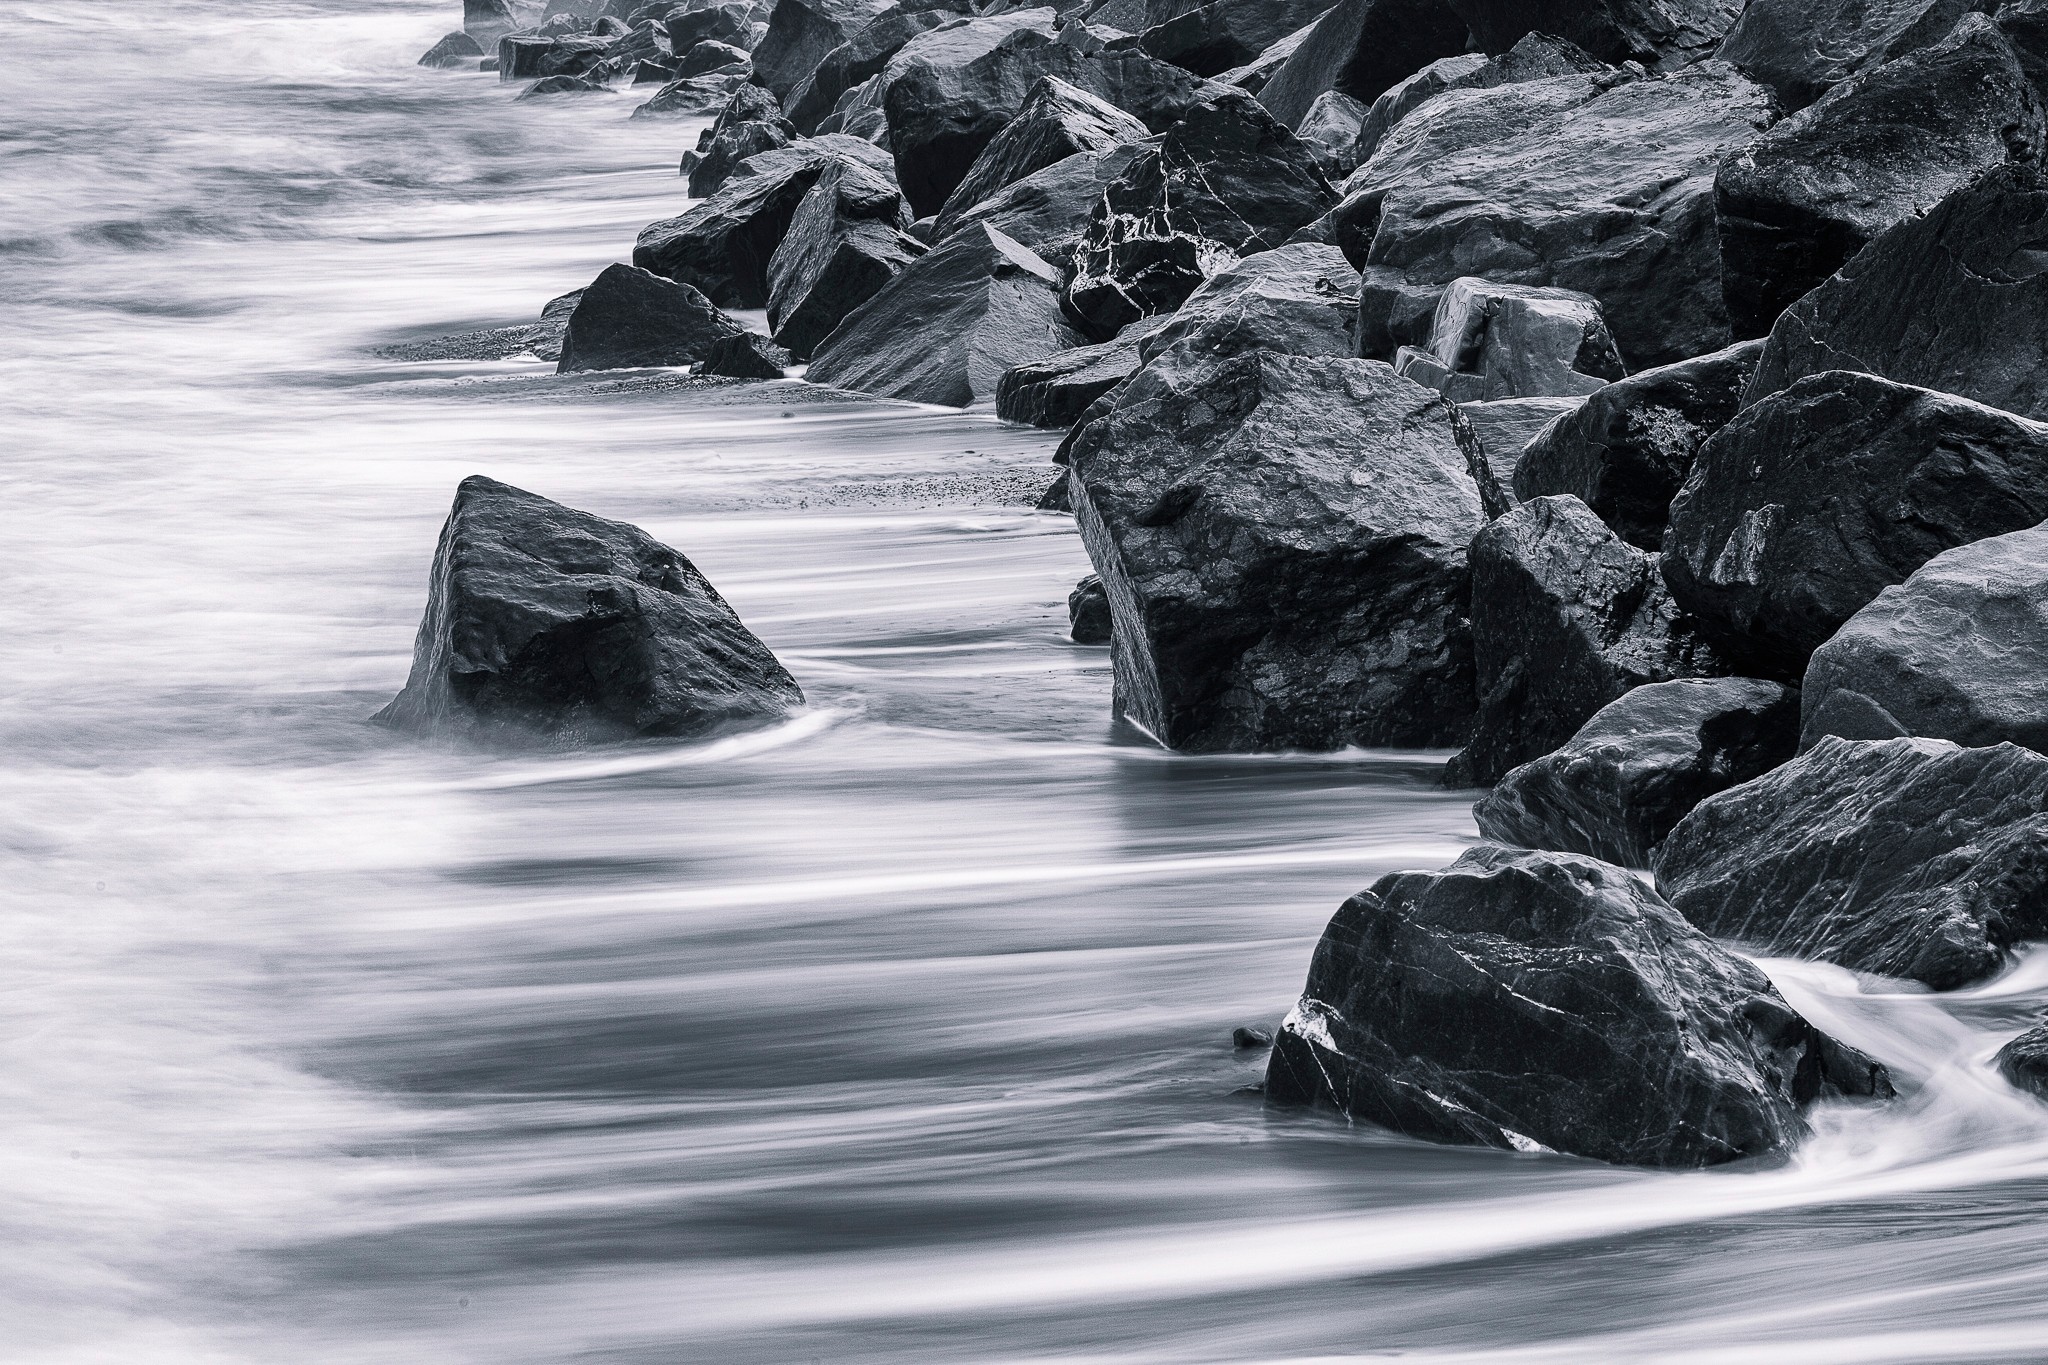 General 2048x1365 nature monochrome water rocks long exposure waves sea stones outdoors